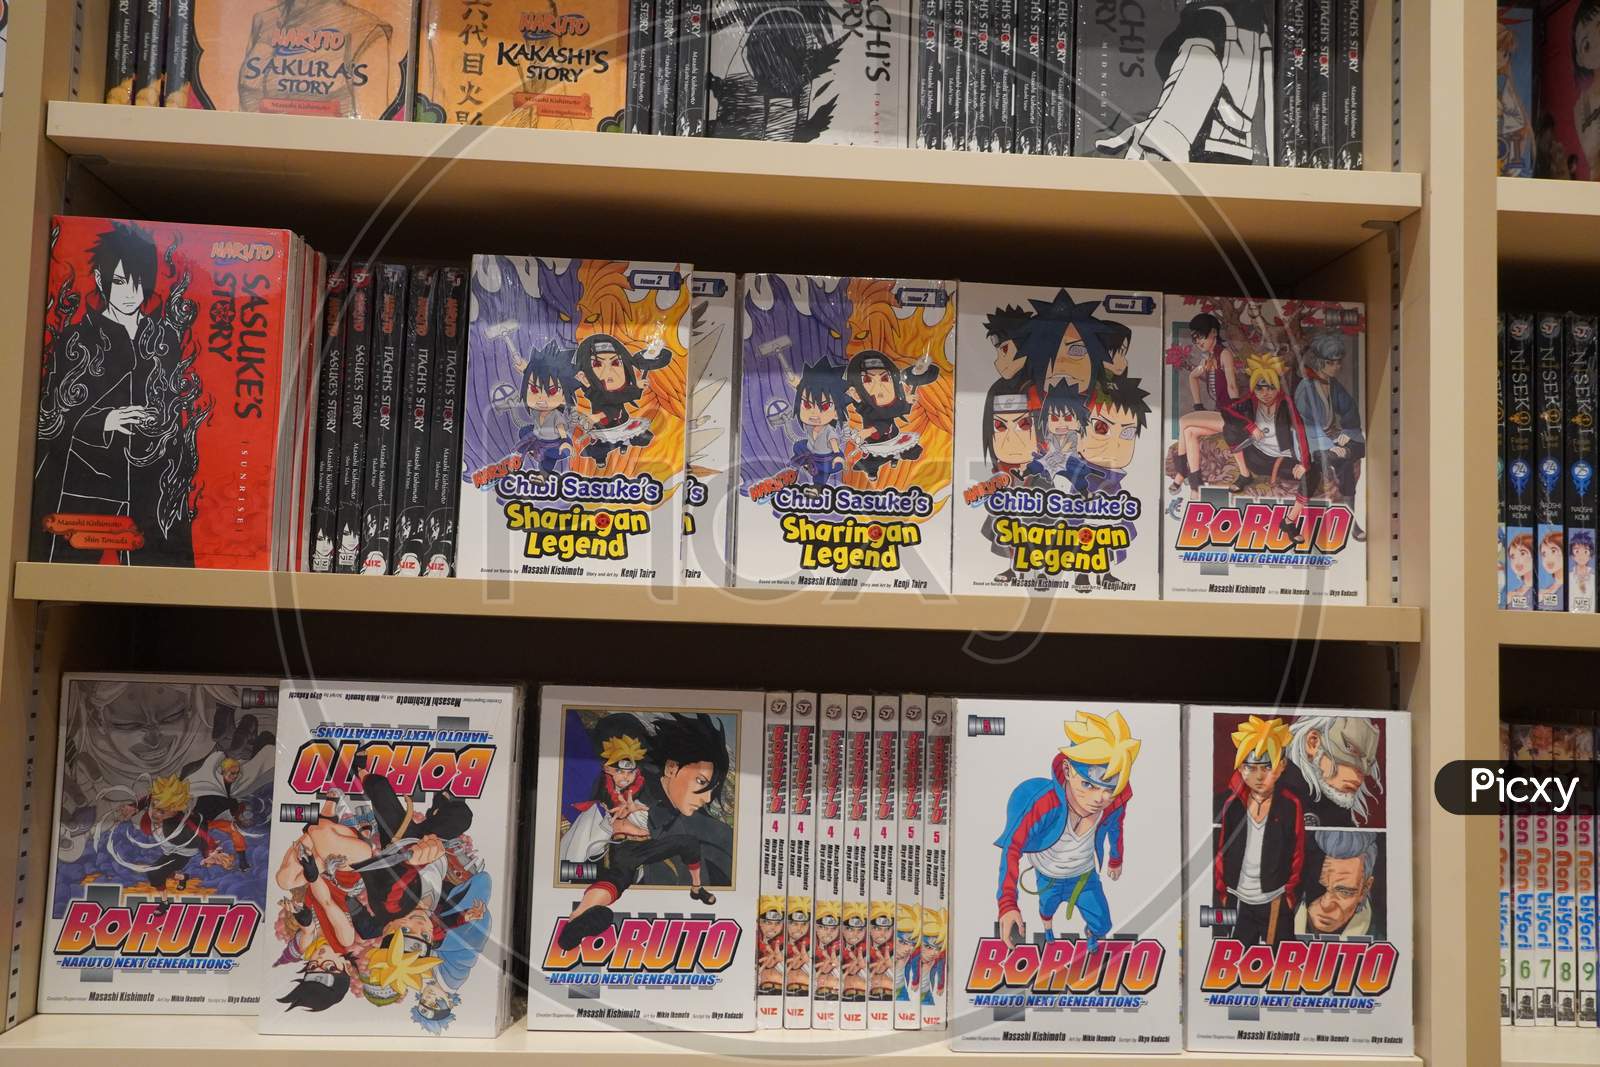 Various Japanese Cartoon Books For Sale In A Bookshop. Anime, Mange. Various Mangas On Display For Sale. Manga Comic Books. Japanese Culture. Japan Comic Magazines.